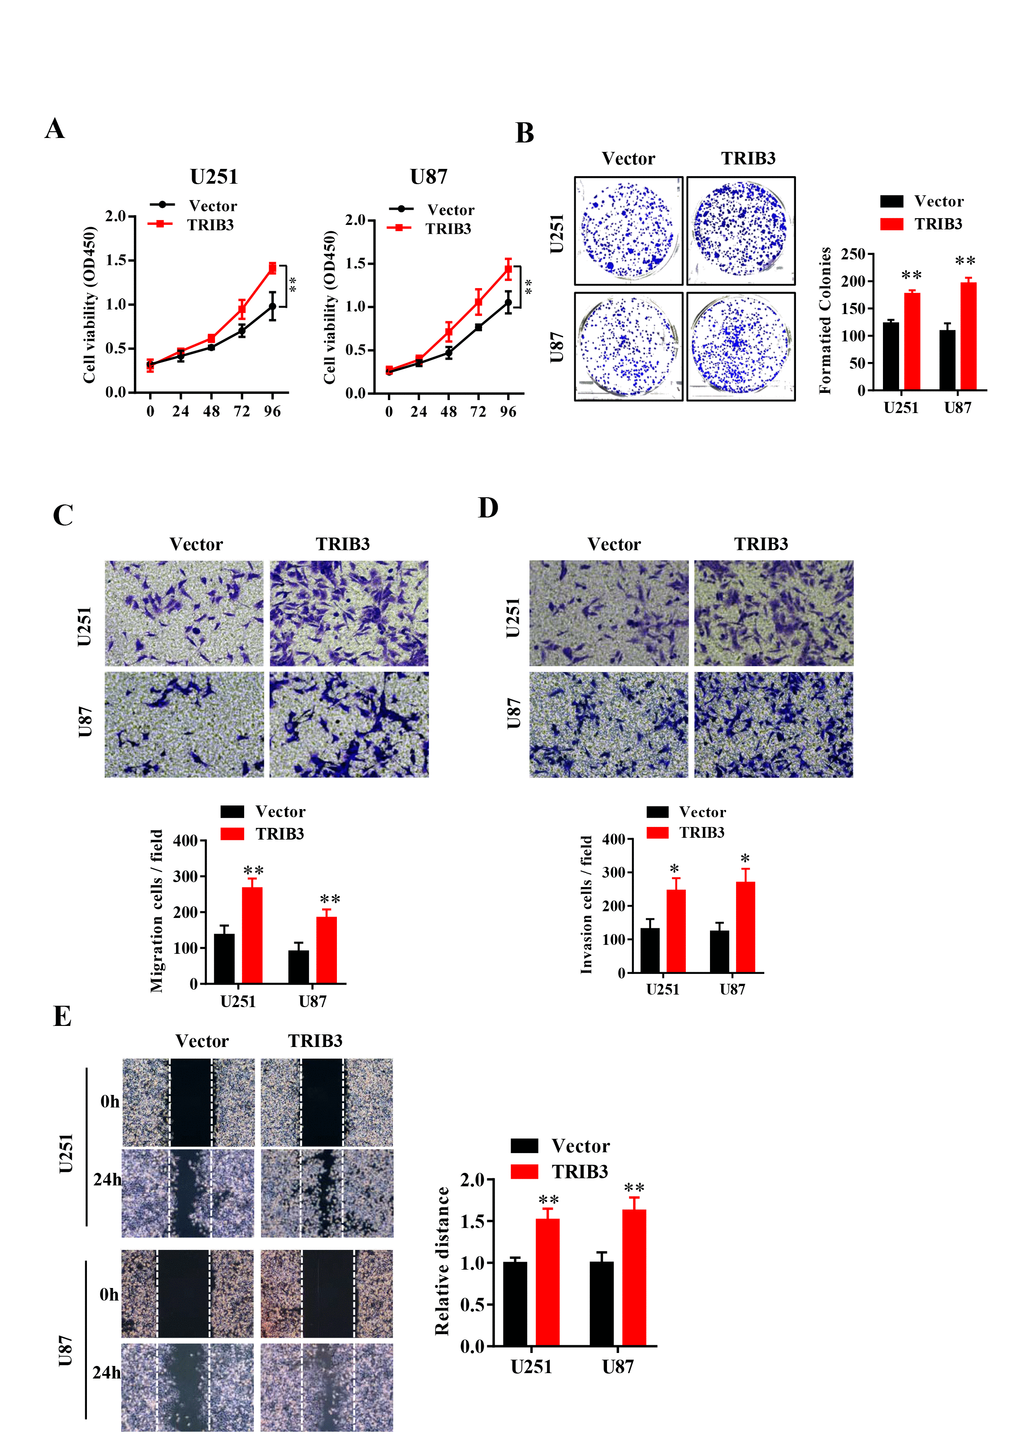 TRIB3 overexpression promotes the proliferation and migration of GBM cells. (A) The cell viability of U251 and U87 GBM cells was evaluated by CCK-8 assay. (B) Colony formation of U251 and U87 cells transfected with vector and TRIB3. (C, D) The cell migration and invasive ability of U251 and U87 cells were measured by Transwell assay. (E) The migration potential of U251 and U87 cells was evaluated by the wound healing test. *p